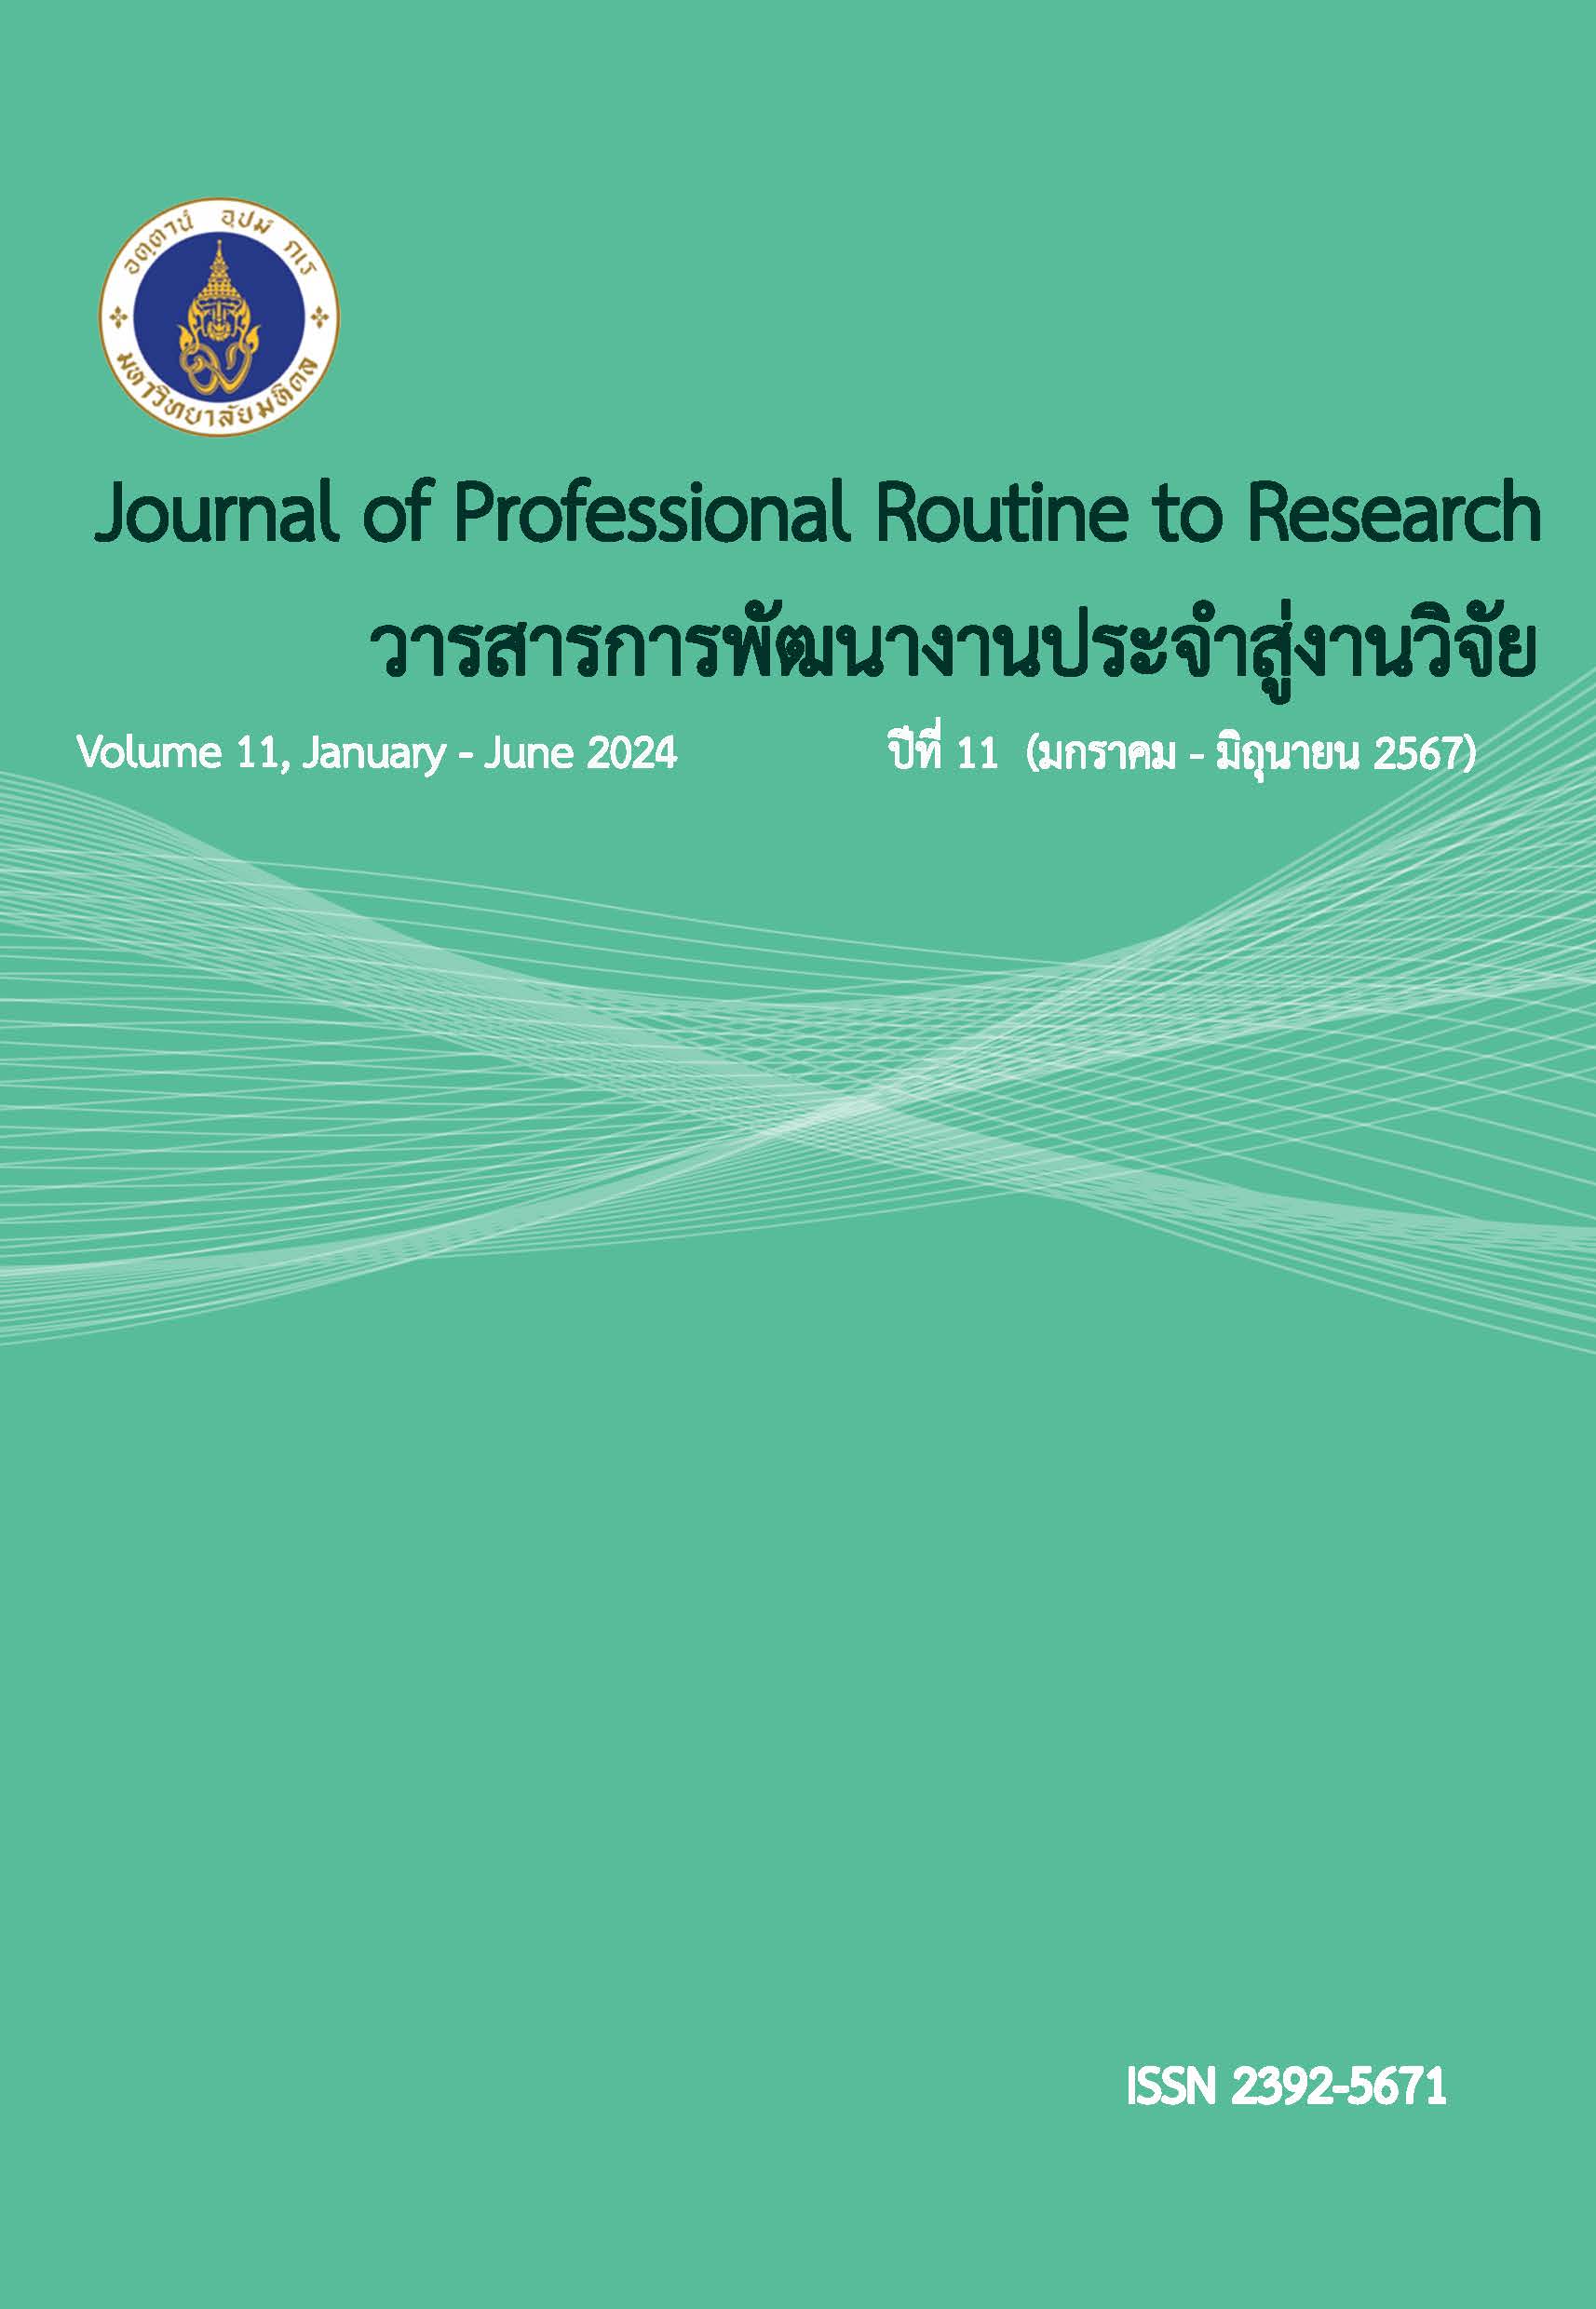 					View Vol. 11 No. 1 (2024): Journal of Professional Routine to Research (JPR2R)
				